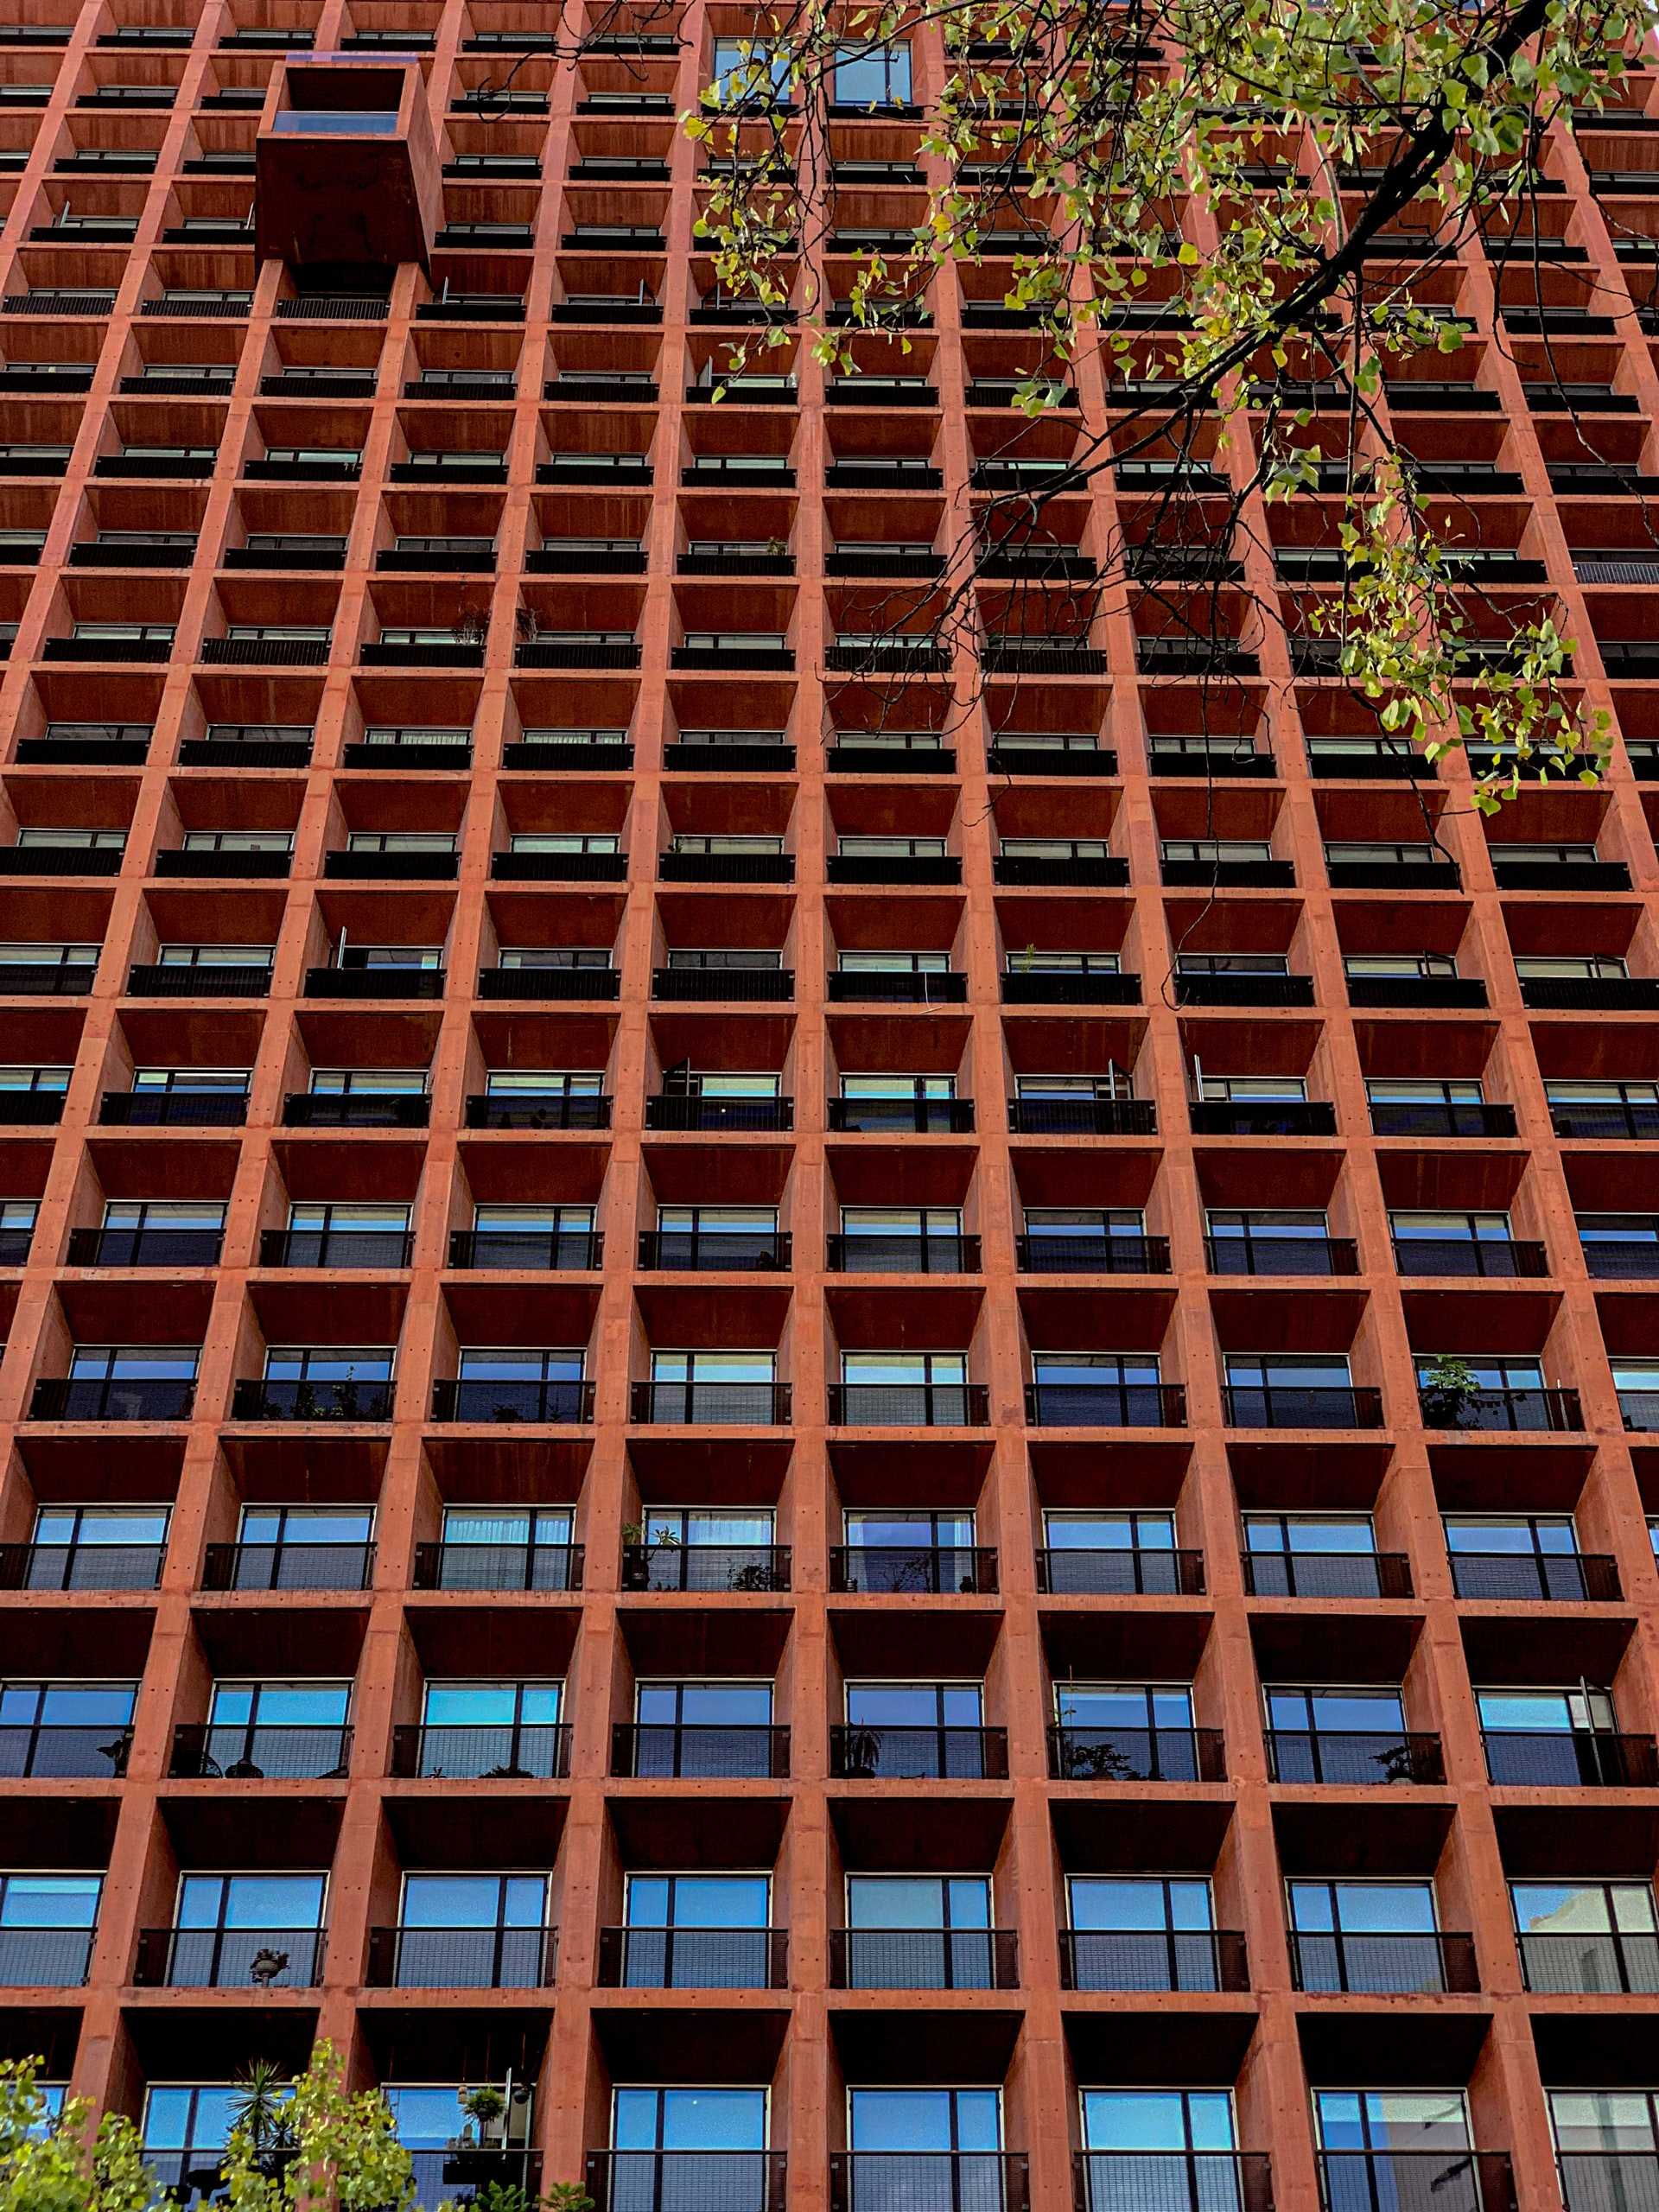 The facade of a brown modernist building.